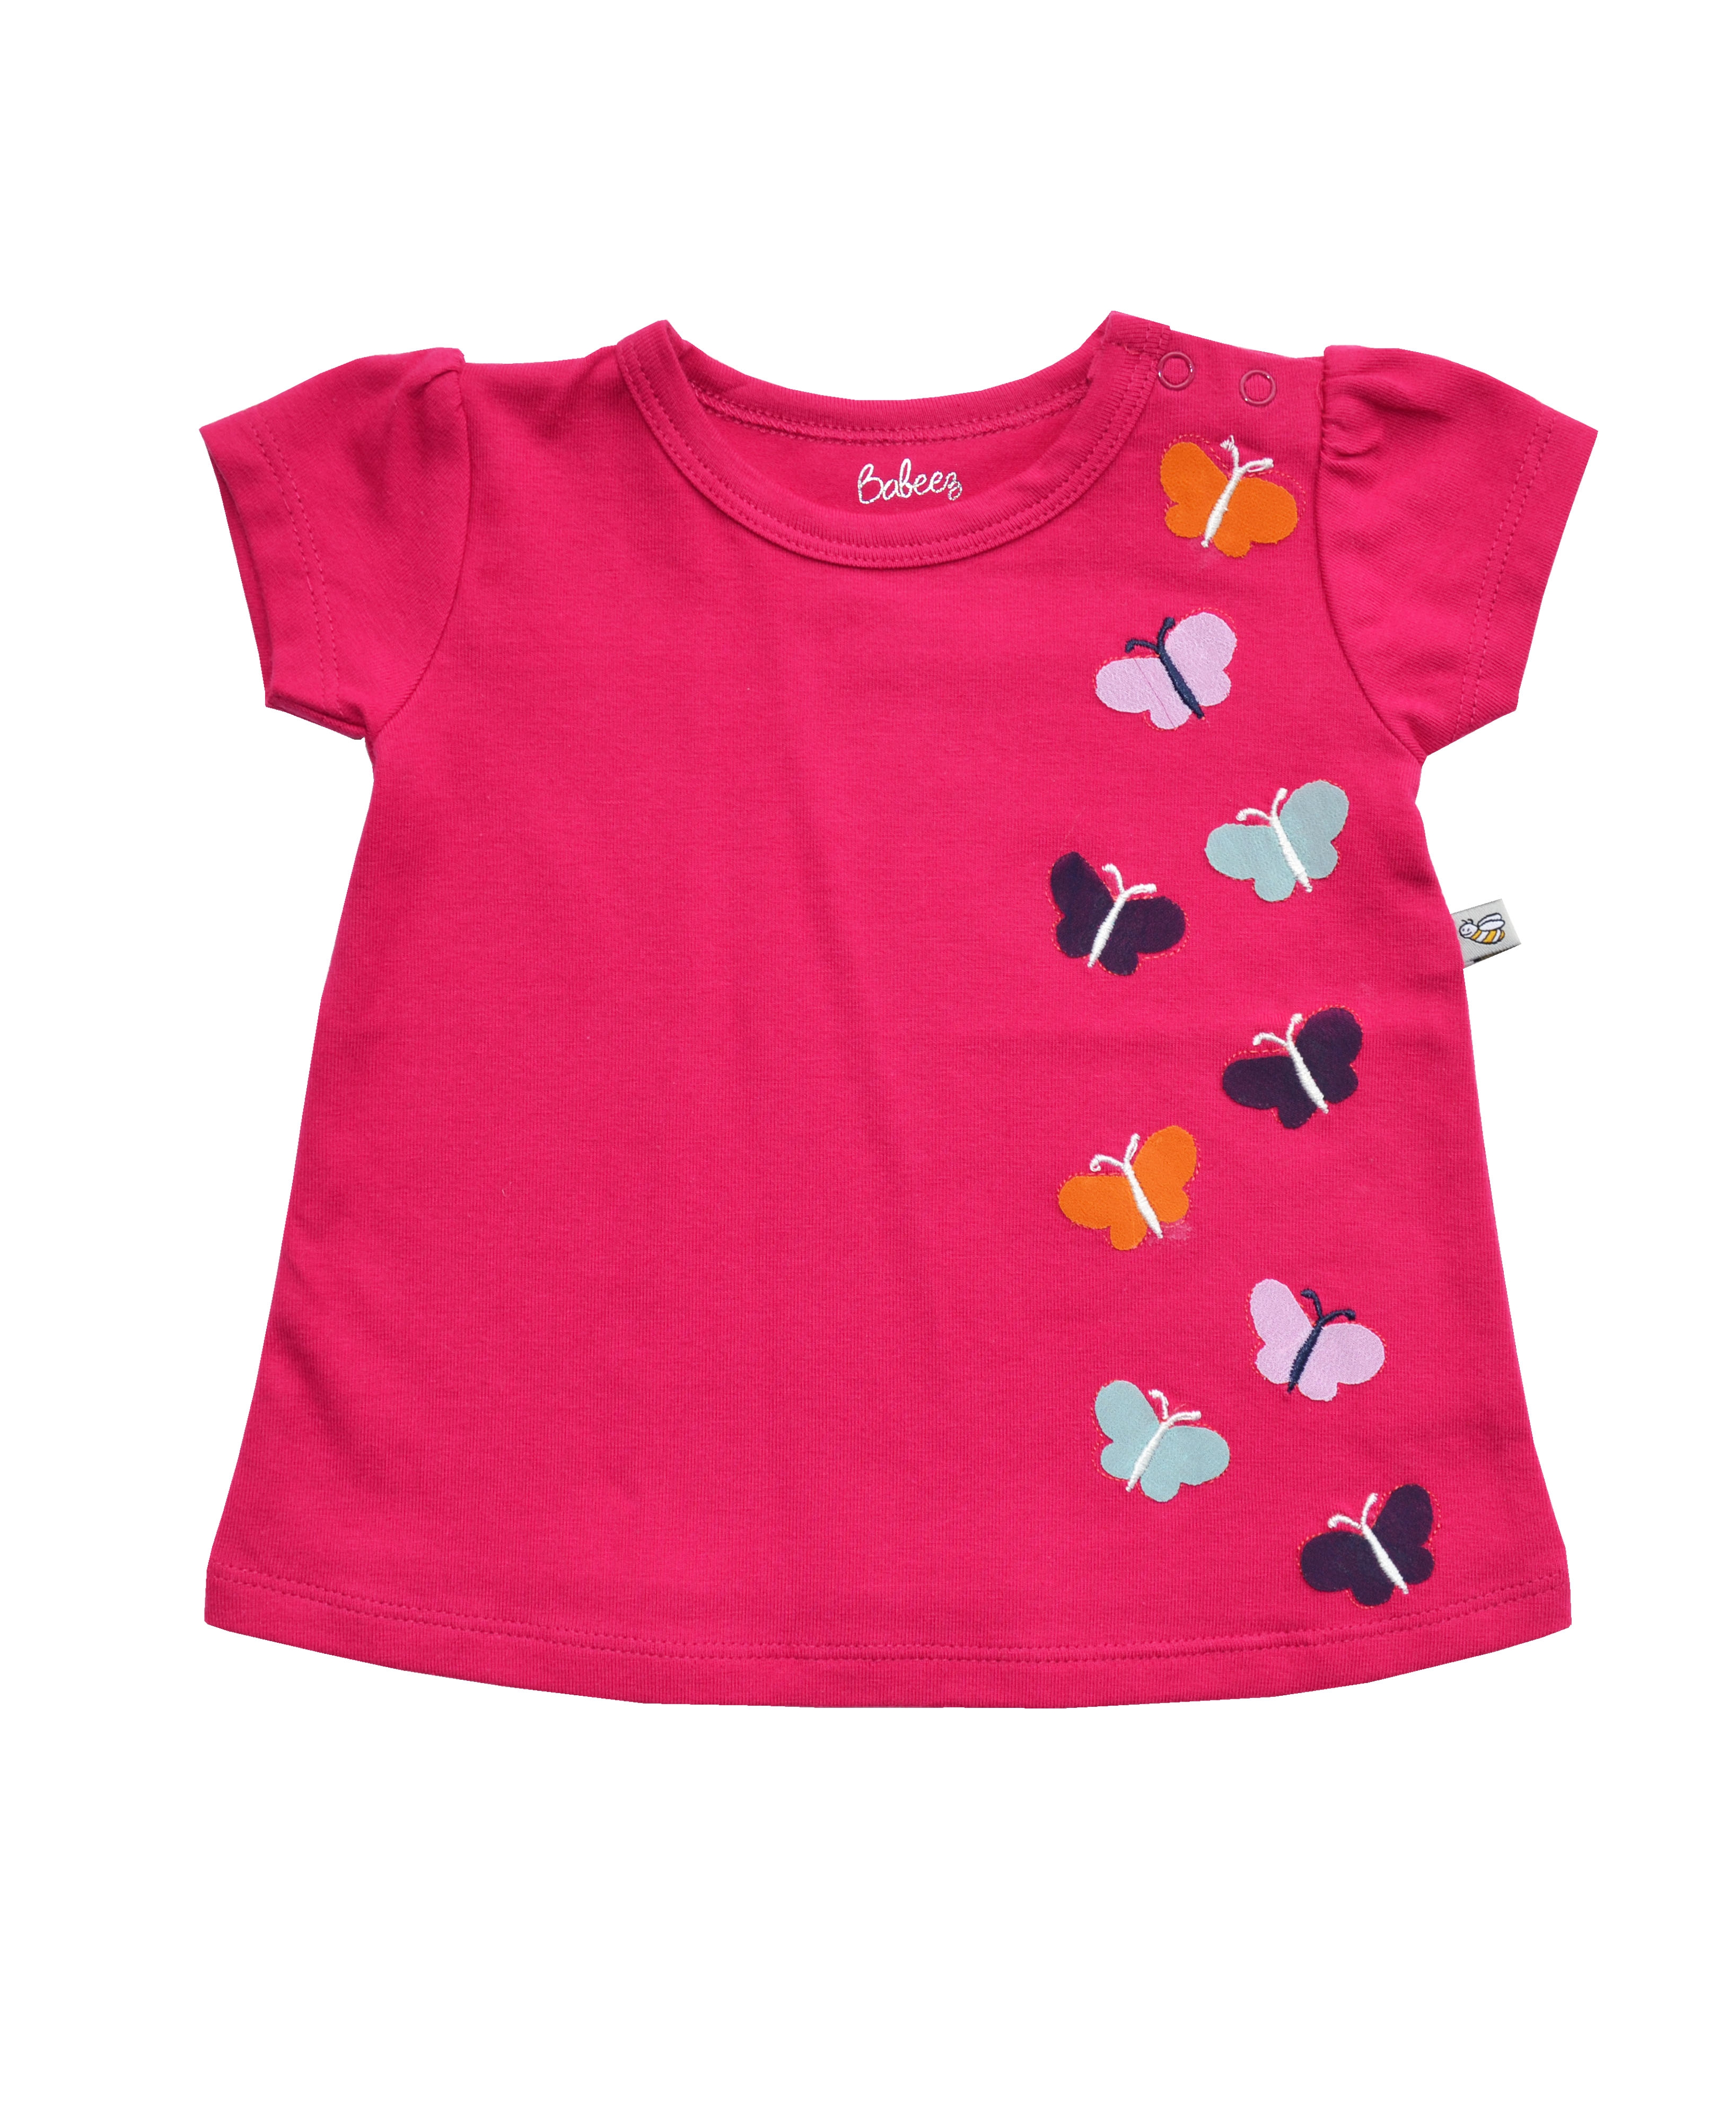 Babeez | Butterfly Applique on Pink Short Sleeves Top ( 95% Cottton 5% Elasthan Jersey) undefined